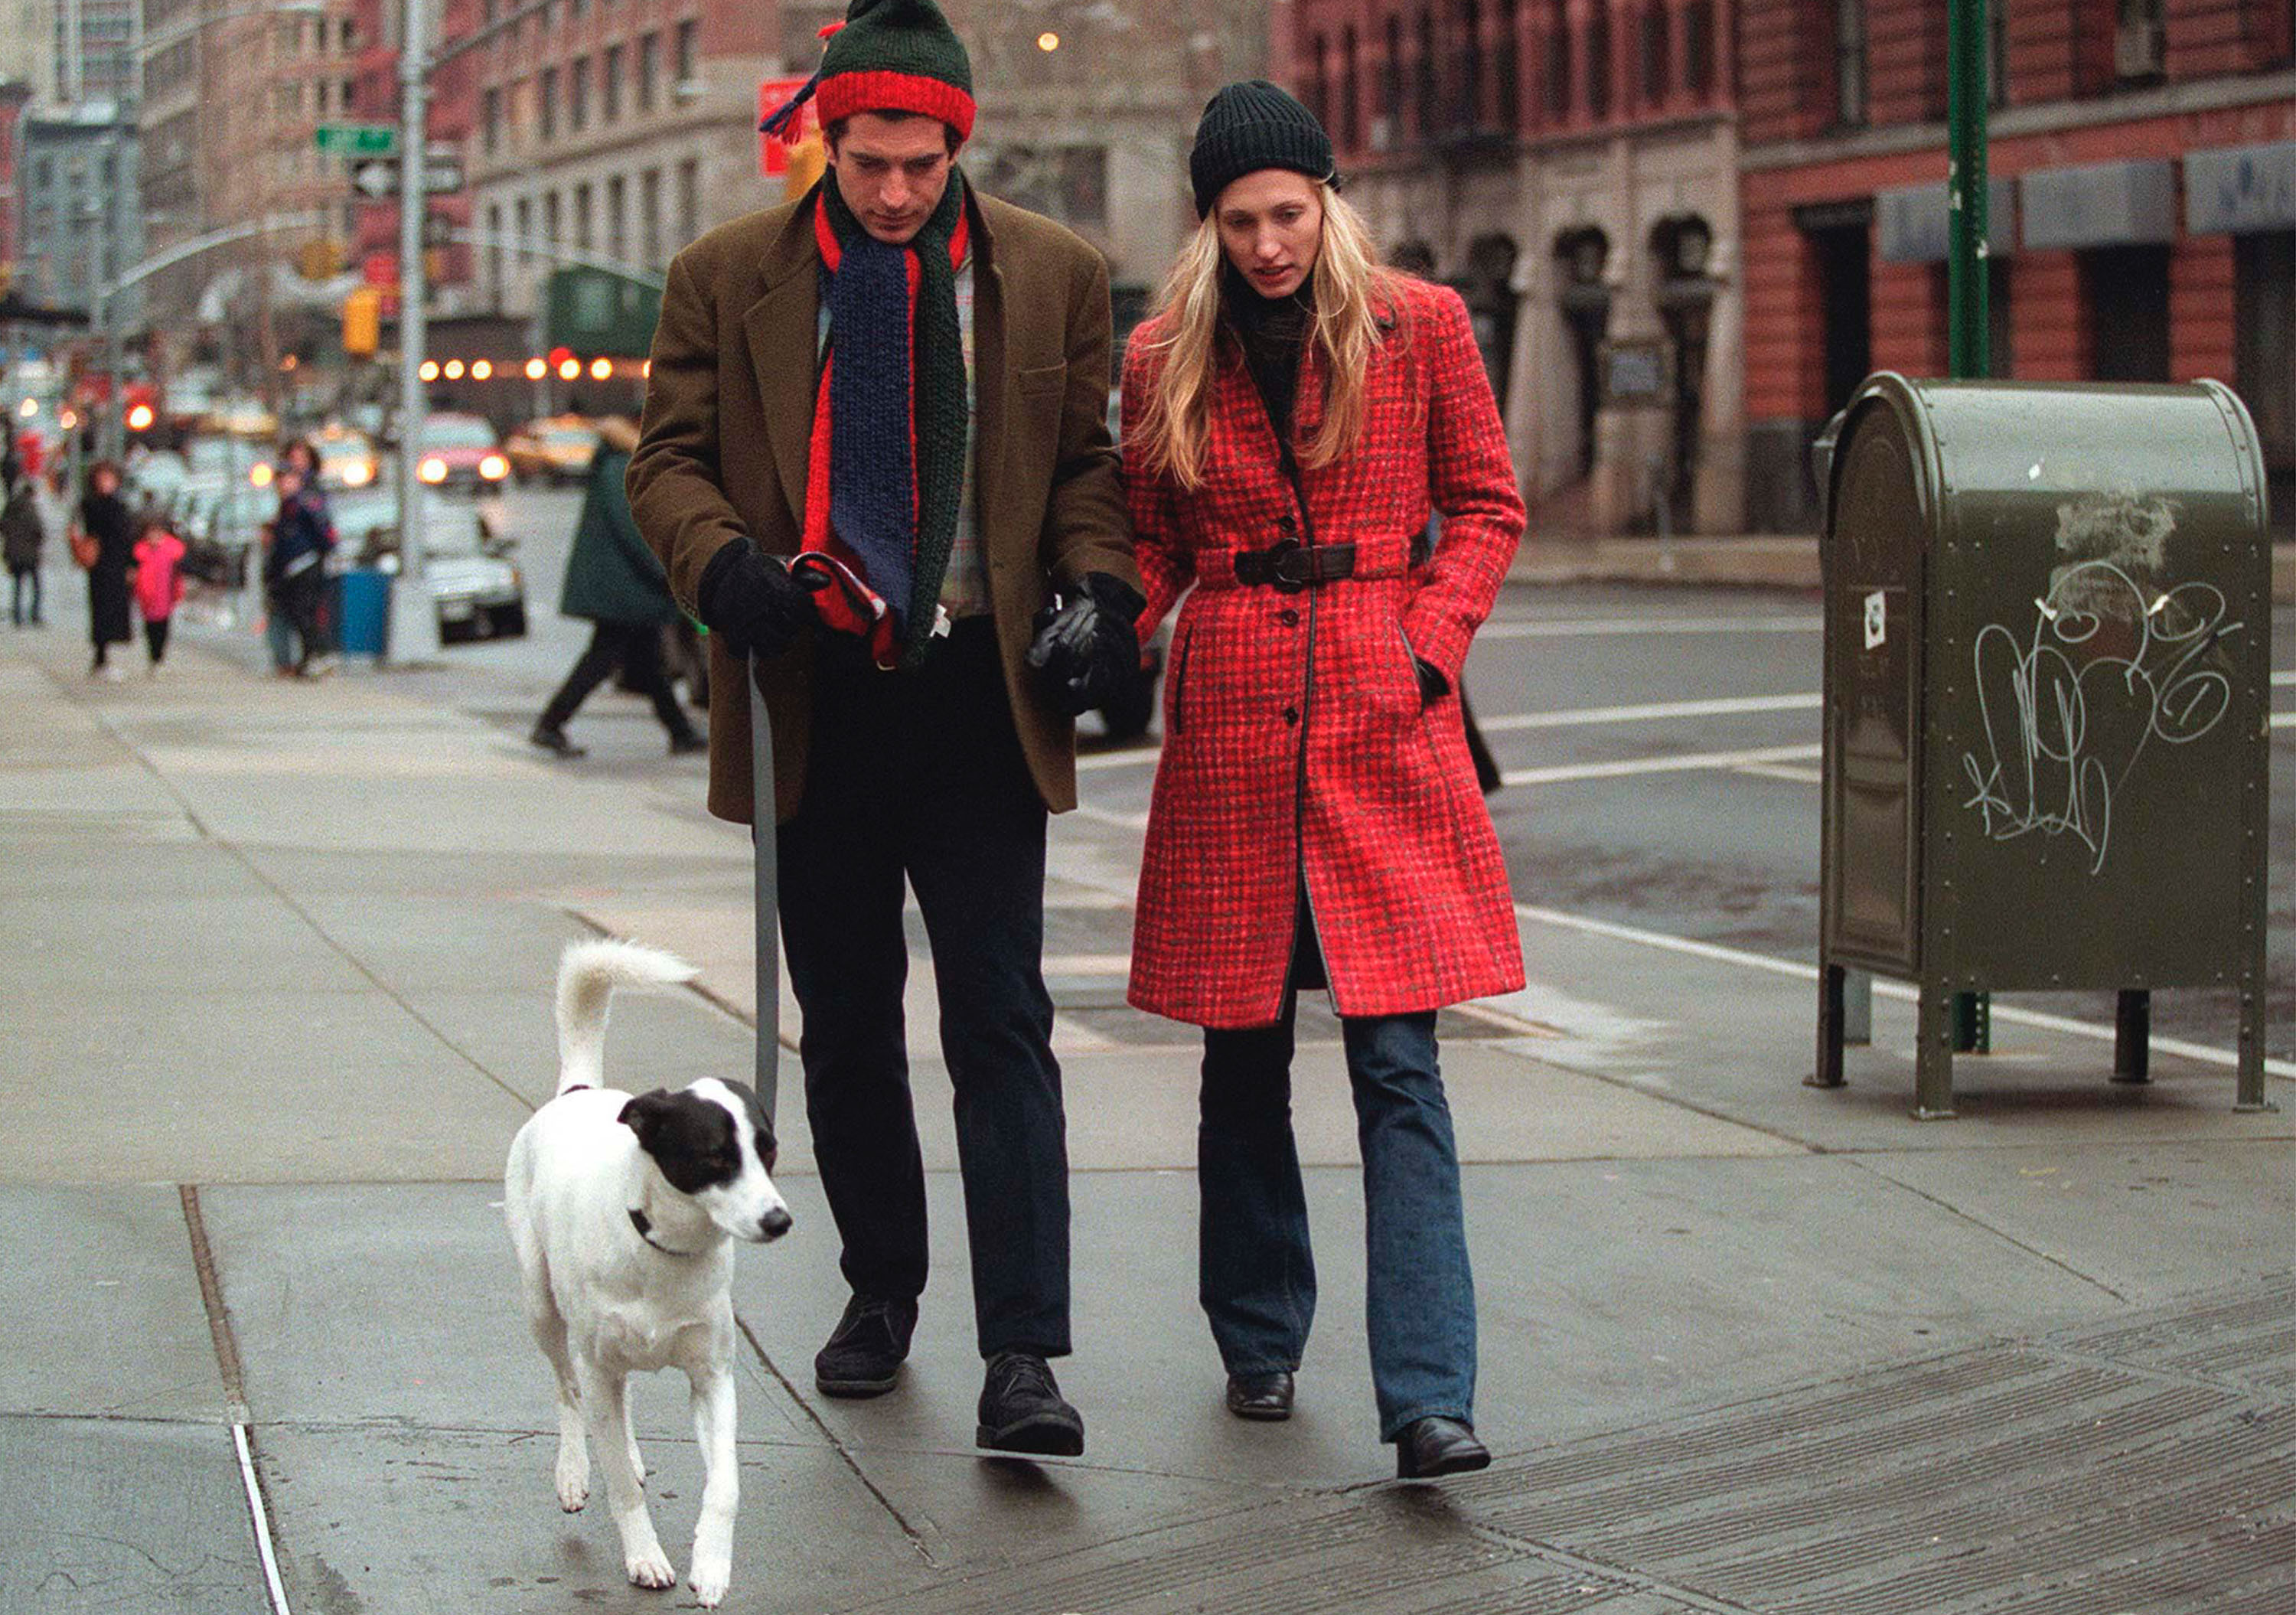 John F. Kennedy Jr. and his wife Carolyn walking with their dog on January 1, 1997 in New York City | Source: Getty Images